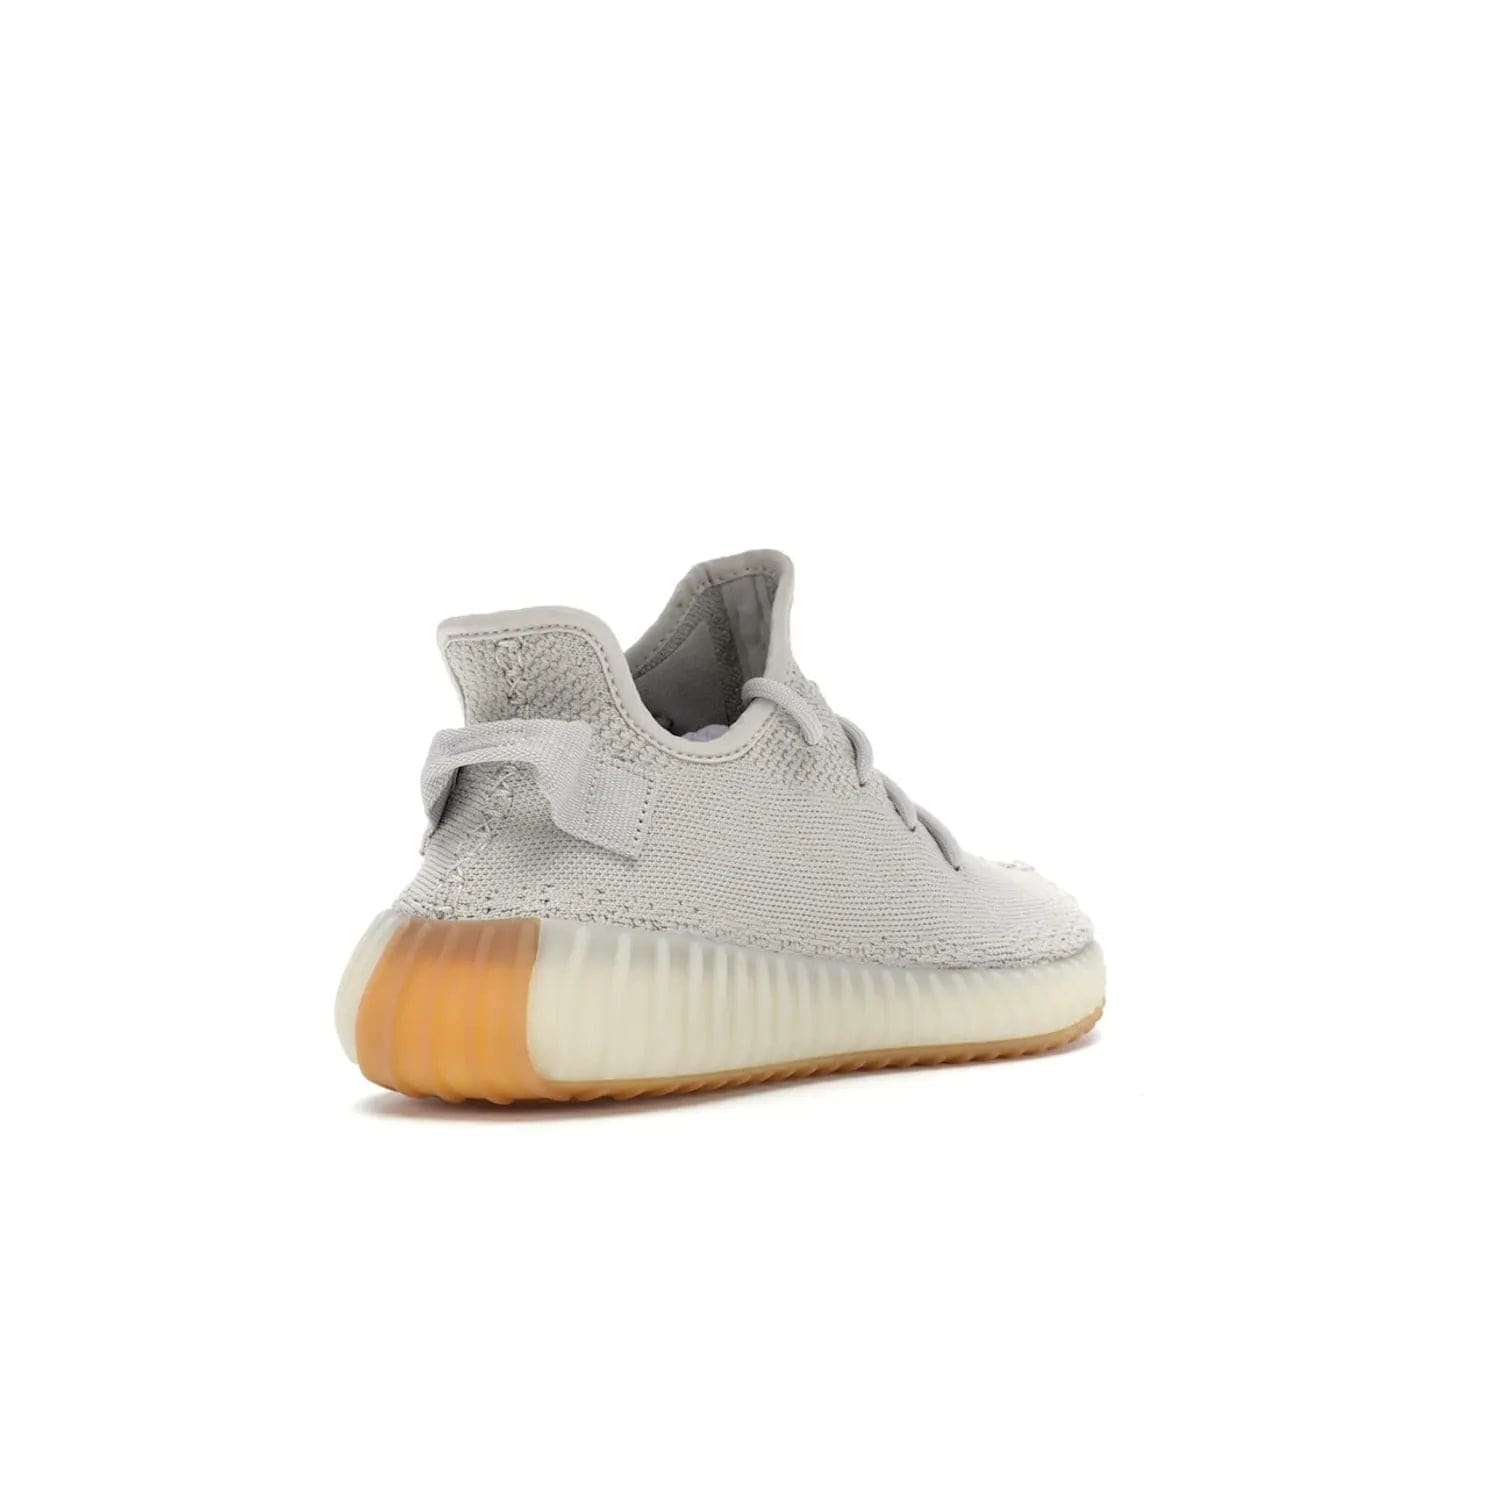 adidas Yeezy Boost 350 V2 Sesame - Image 32 - Only at www.BallersClubKickz.com - Introducing the adidas Yeezy Boost 350 V2 Sesame. Featuring a sesame upper, midsole and gum sole for a sleek silhouette. Cop the stylish sneaker released in November 2018.